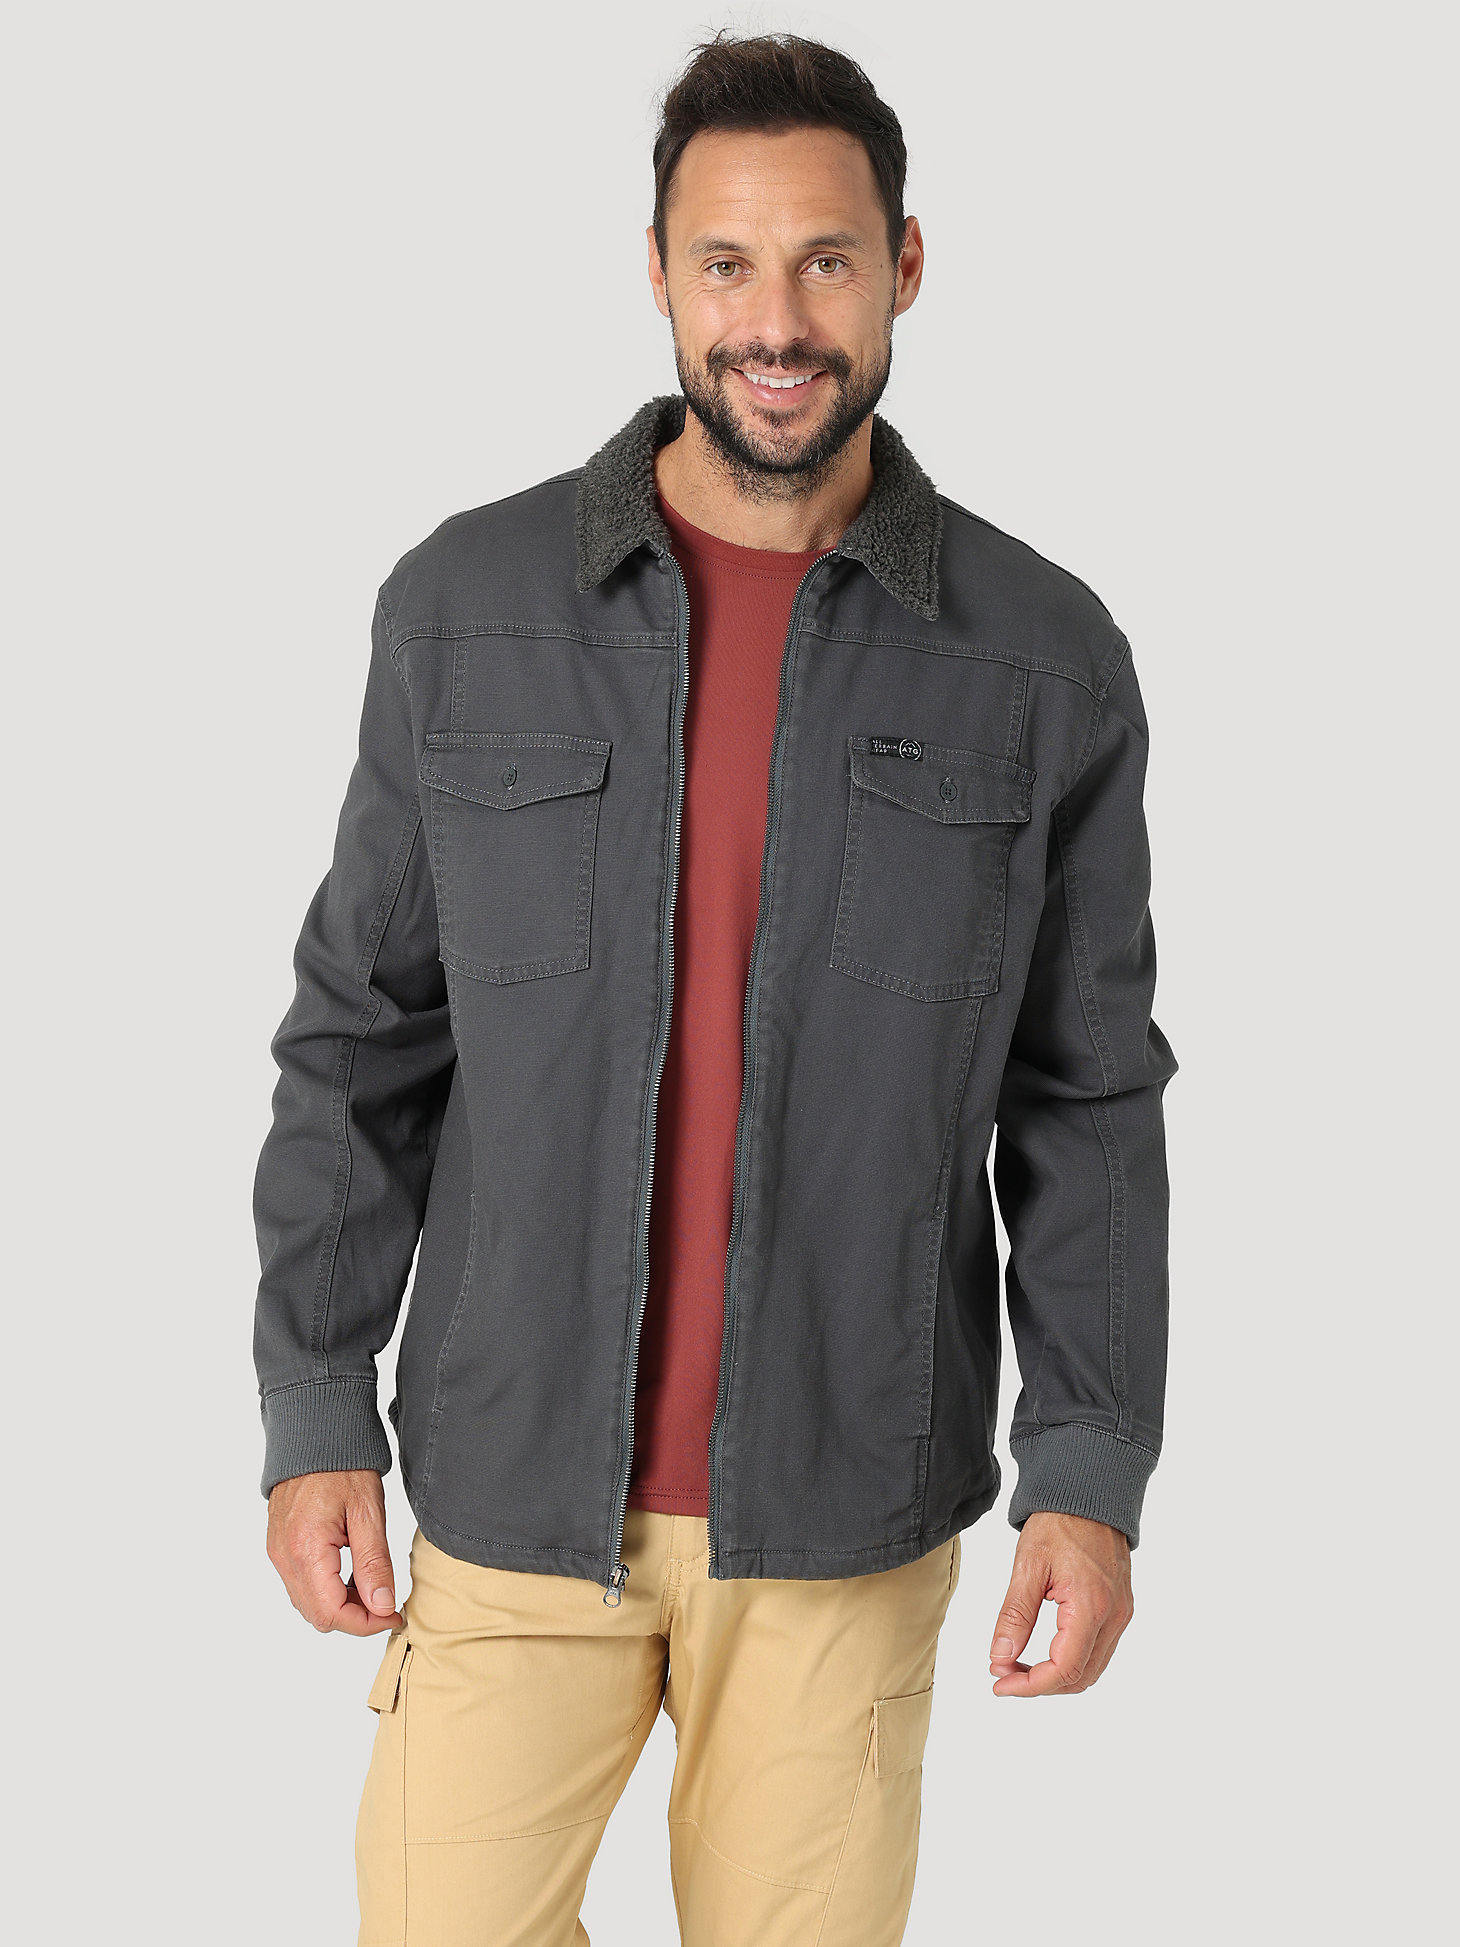 ATG by Wrangler™ Men's Sherpa Lined Canvas Jacket in Asphalt main view